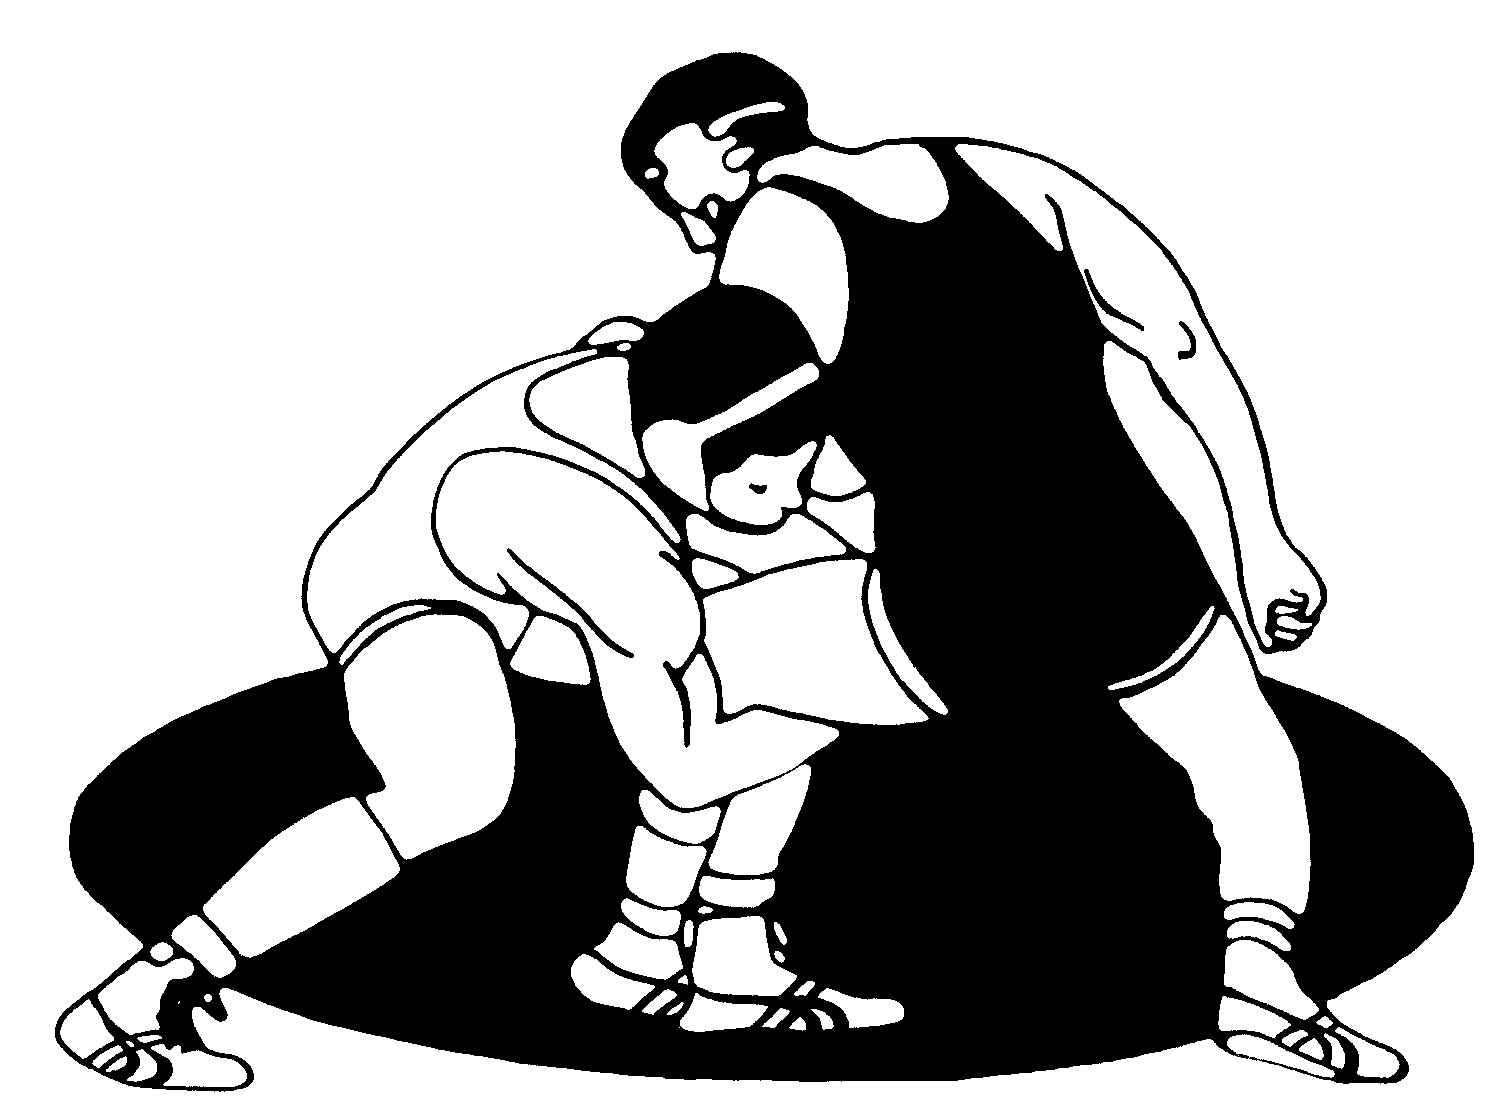 Woman wrestling clipart black and white 